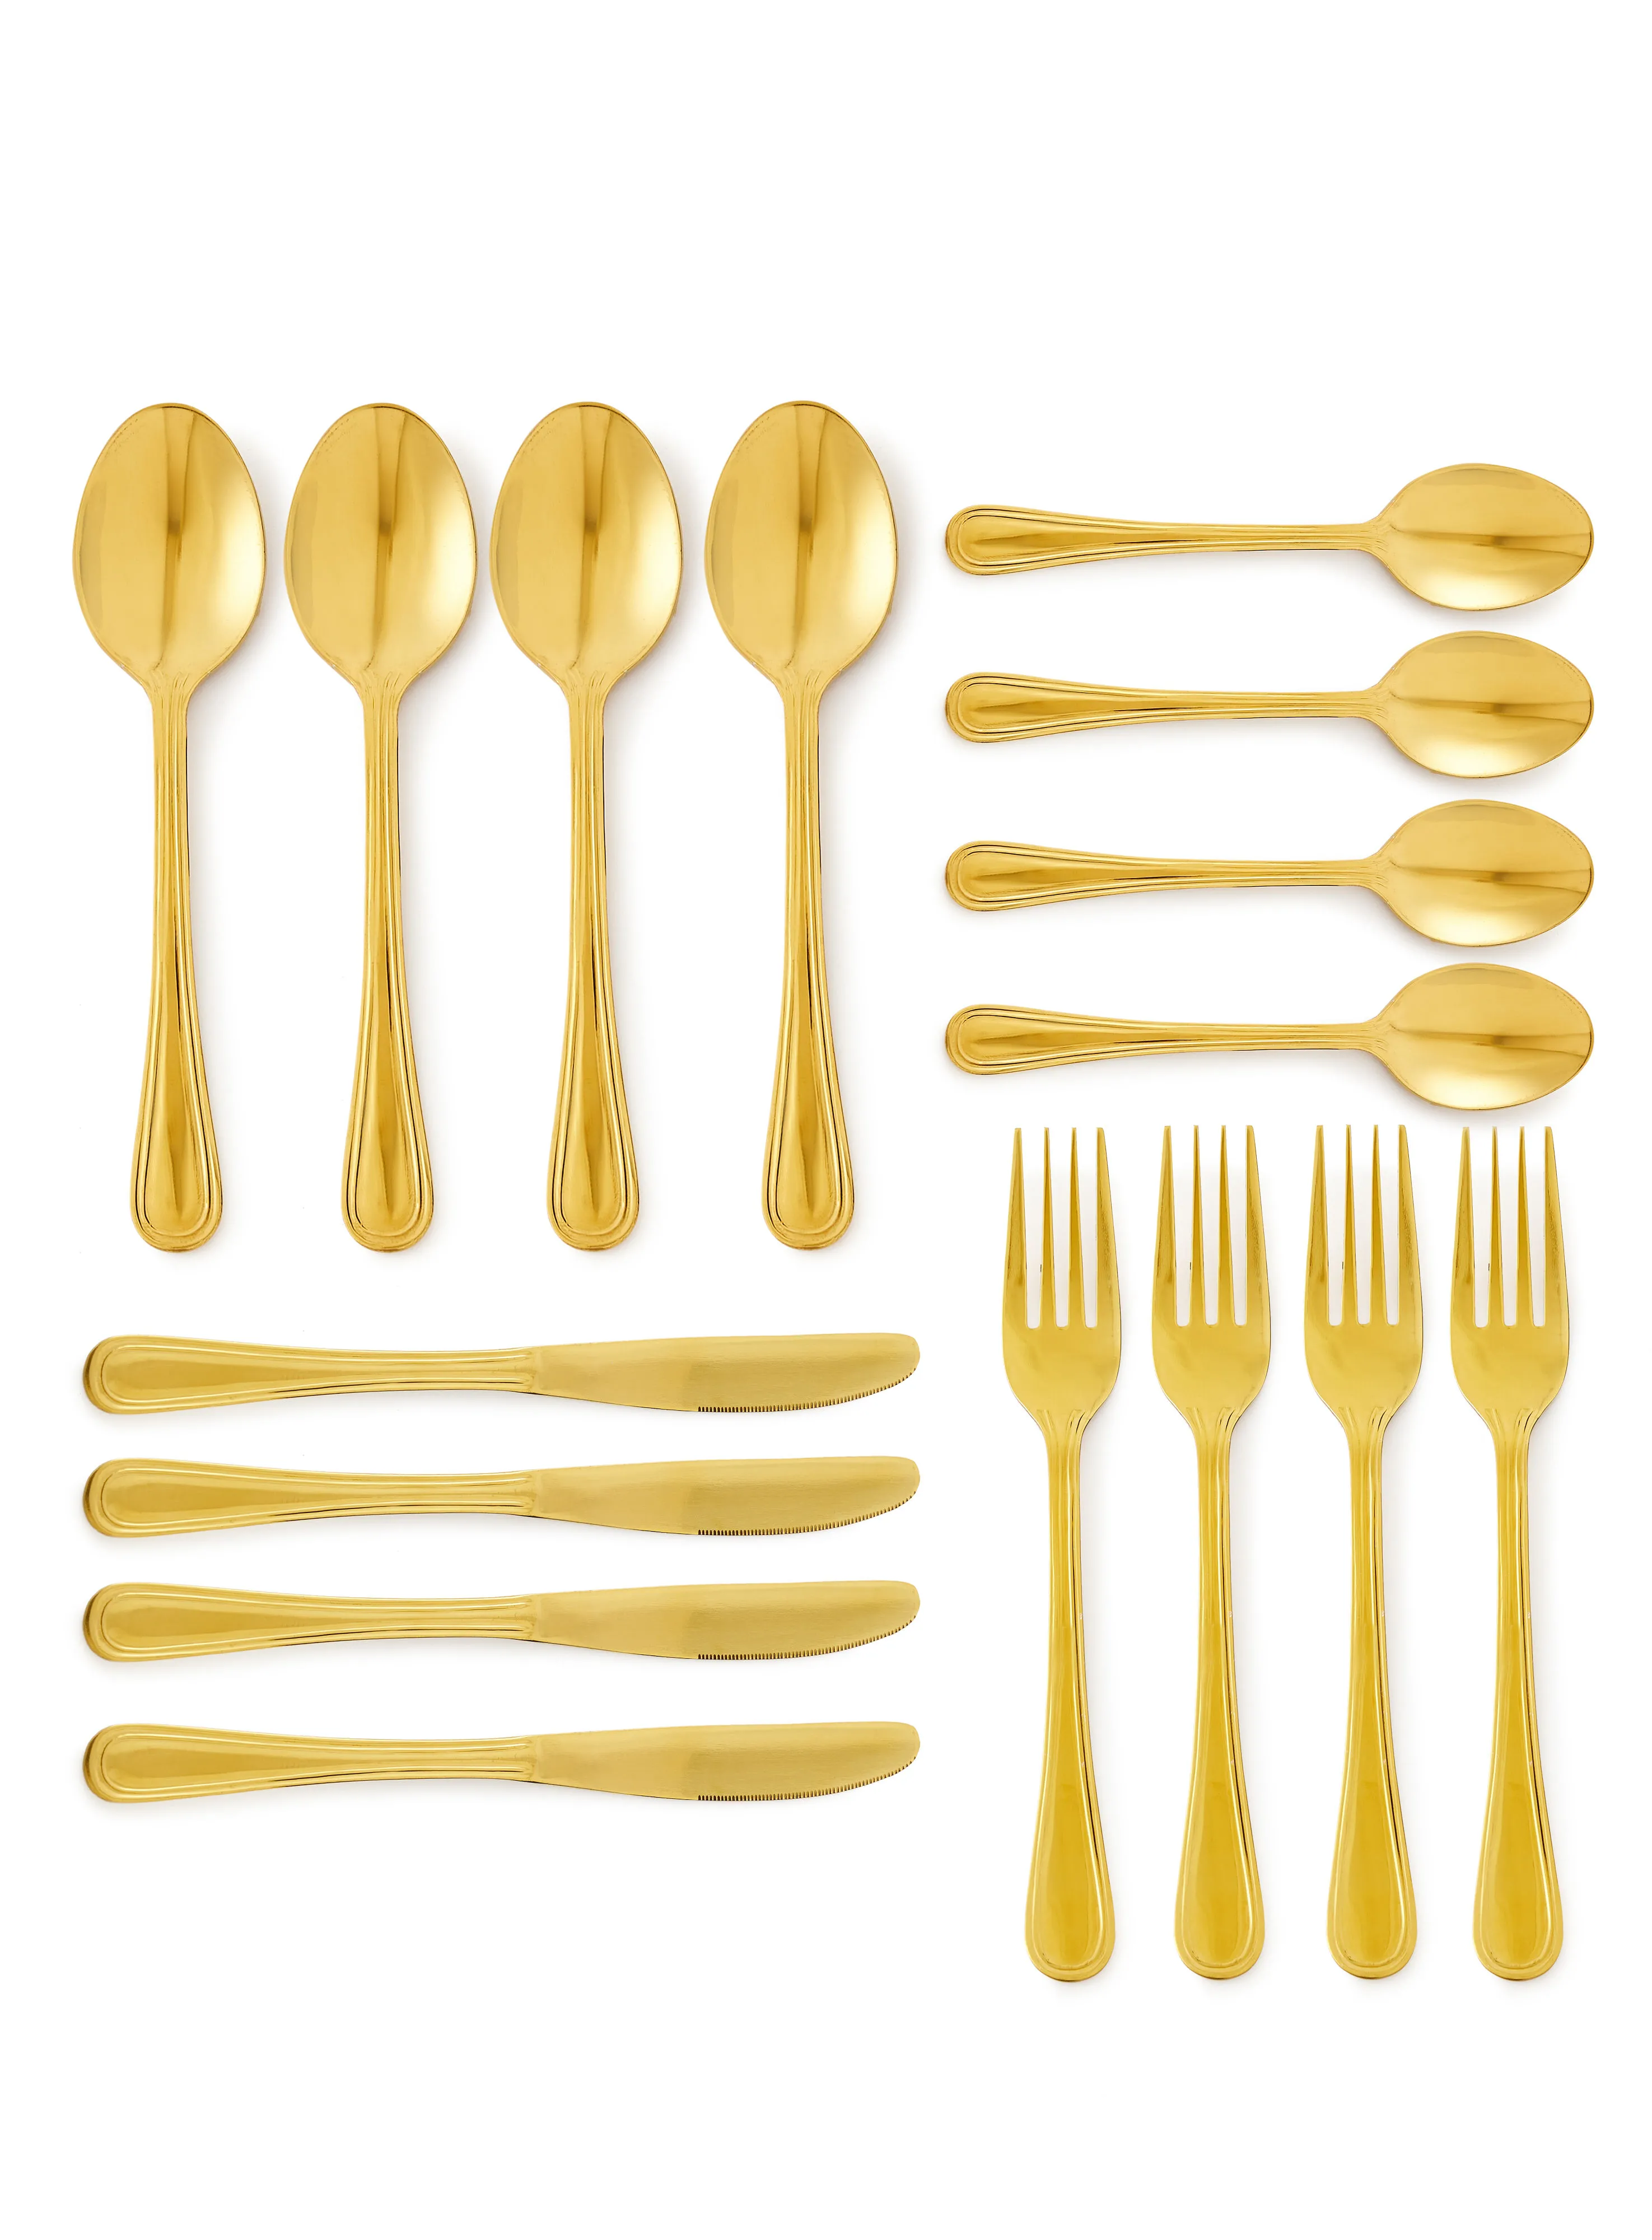 noon east 16 Piece Cutlery Set - Made Of Stainless Steel - Silverware Flatware - Spoons And Forks Set, Spoon Set - Table Spoons, Tea Spoons, Forks, Knives - Serves 4 - Design Gold Scorpious